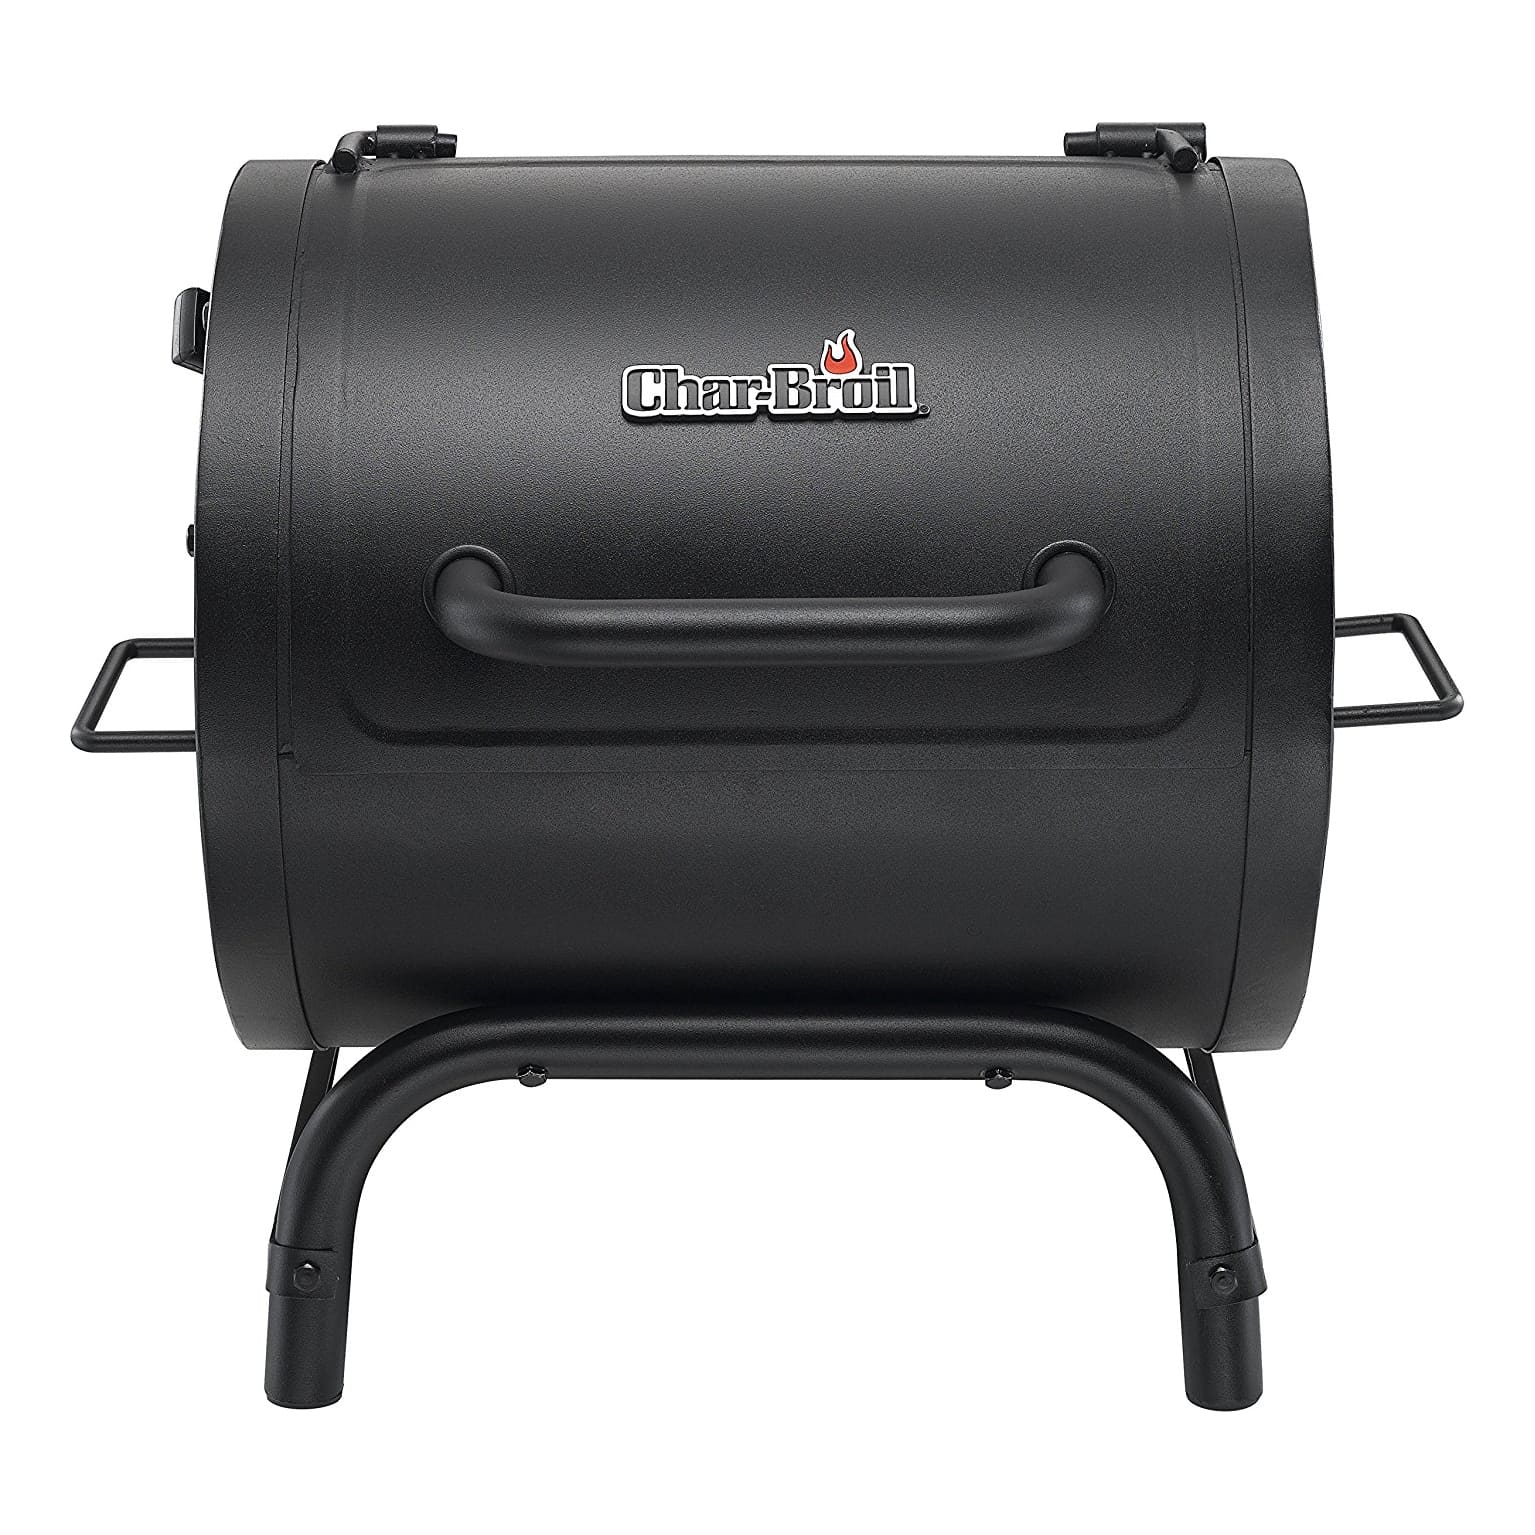 Char-Broil® American Gourmet Charcoal Tabletop Grill - Front View